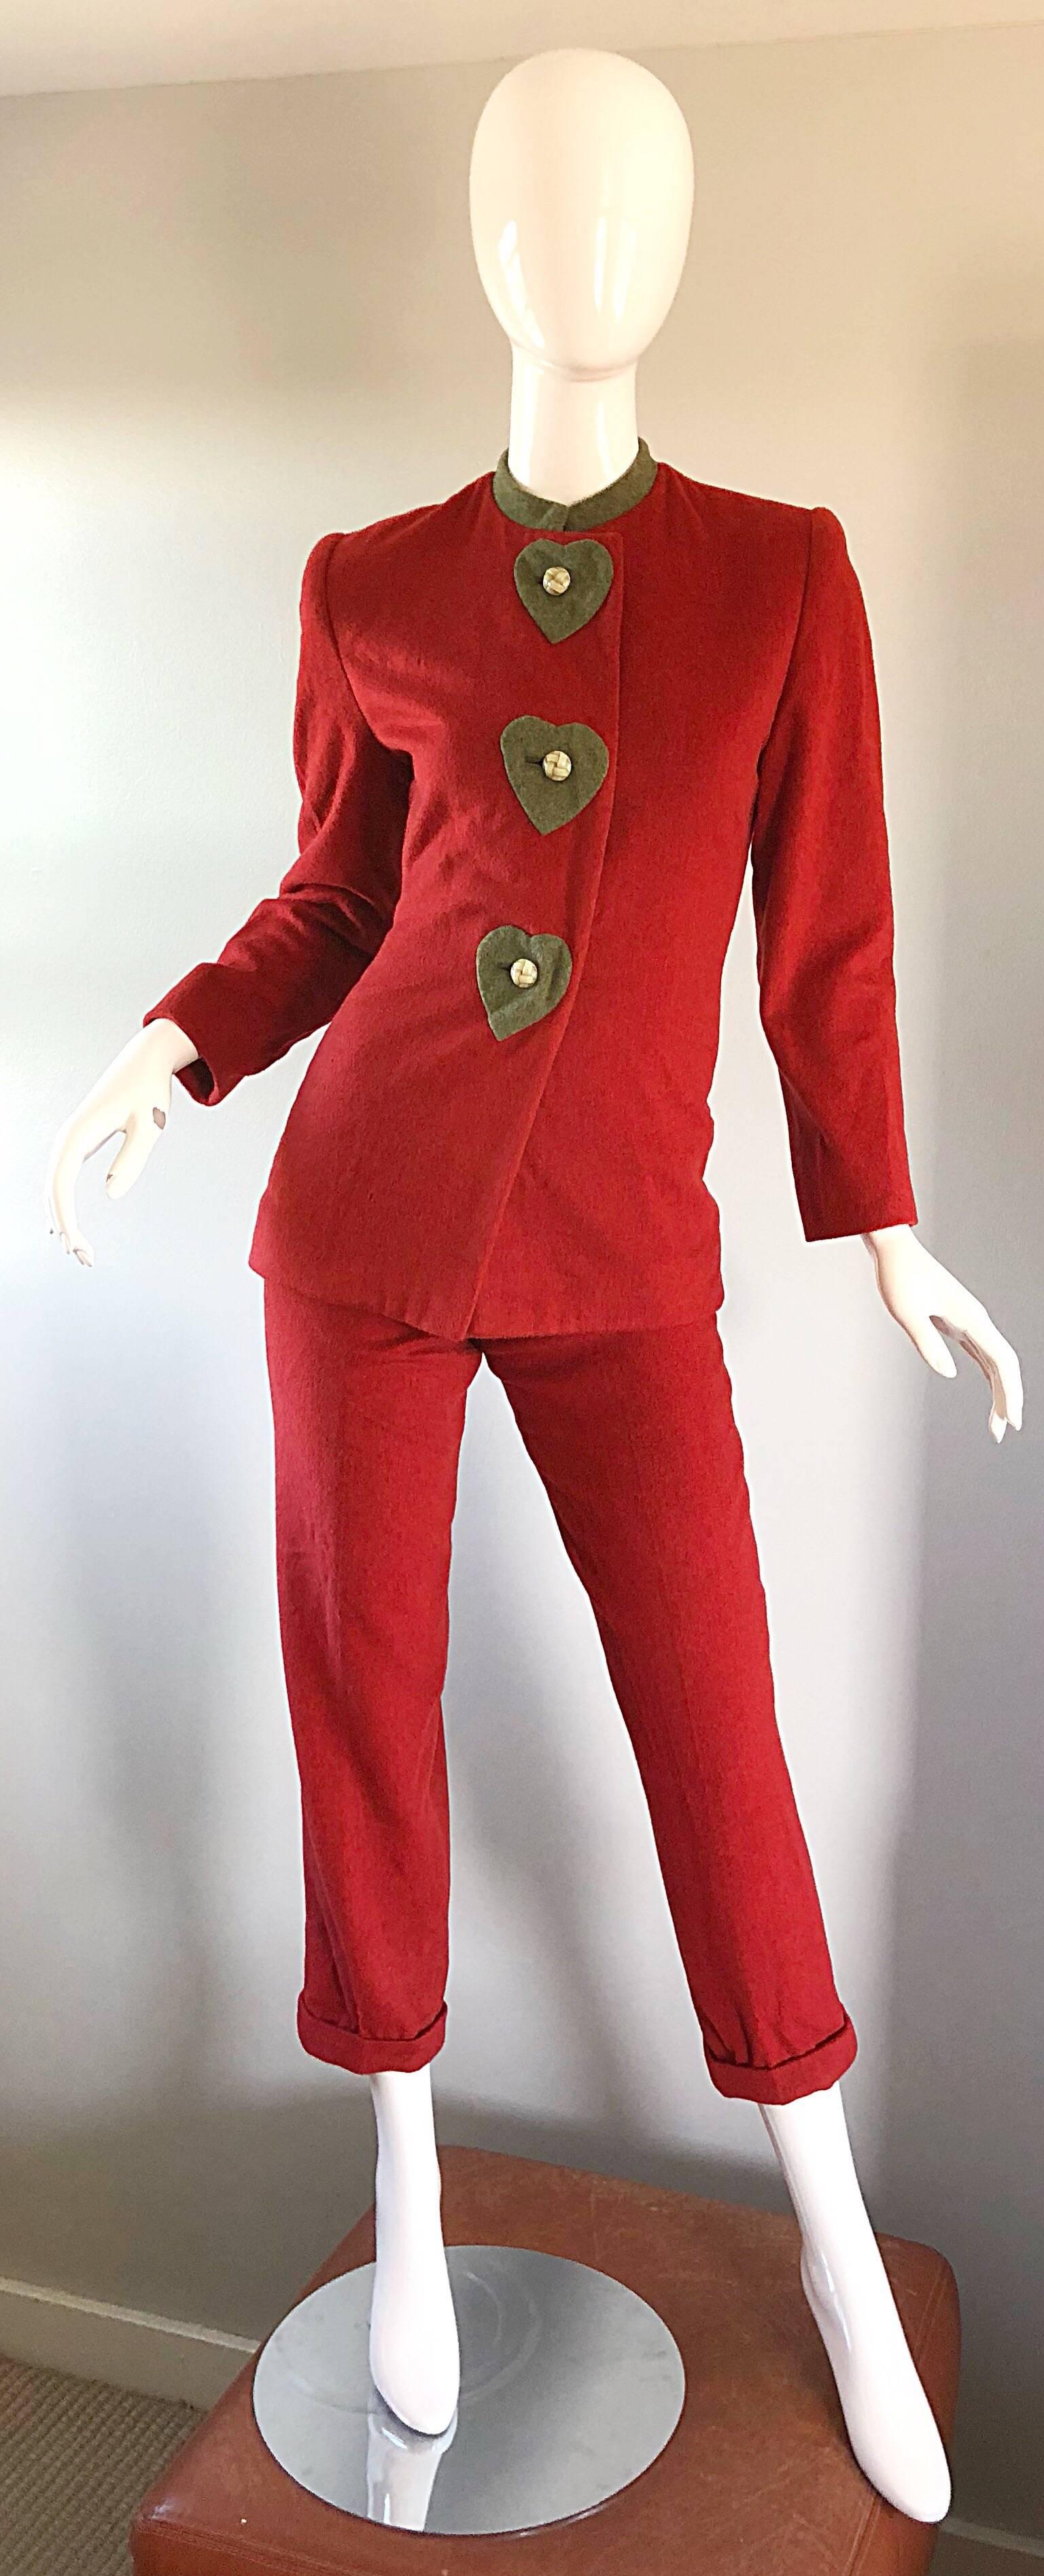 Rare vintage early 90s CAROLINA HERRERA brick red + forest green novelty cropped trouser jacket / blazer suit virgin wool ensemble! Features a tailored mondrian collar fitted jacket, with high rise slim cropped cuffed pants. Pants feature hidden